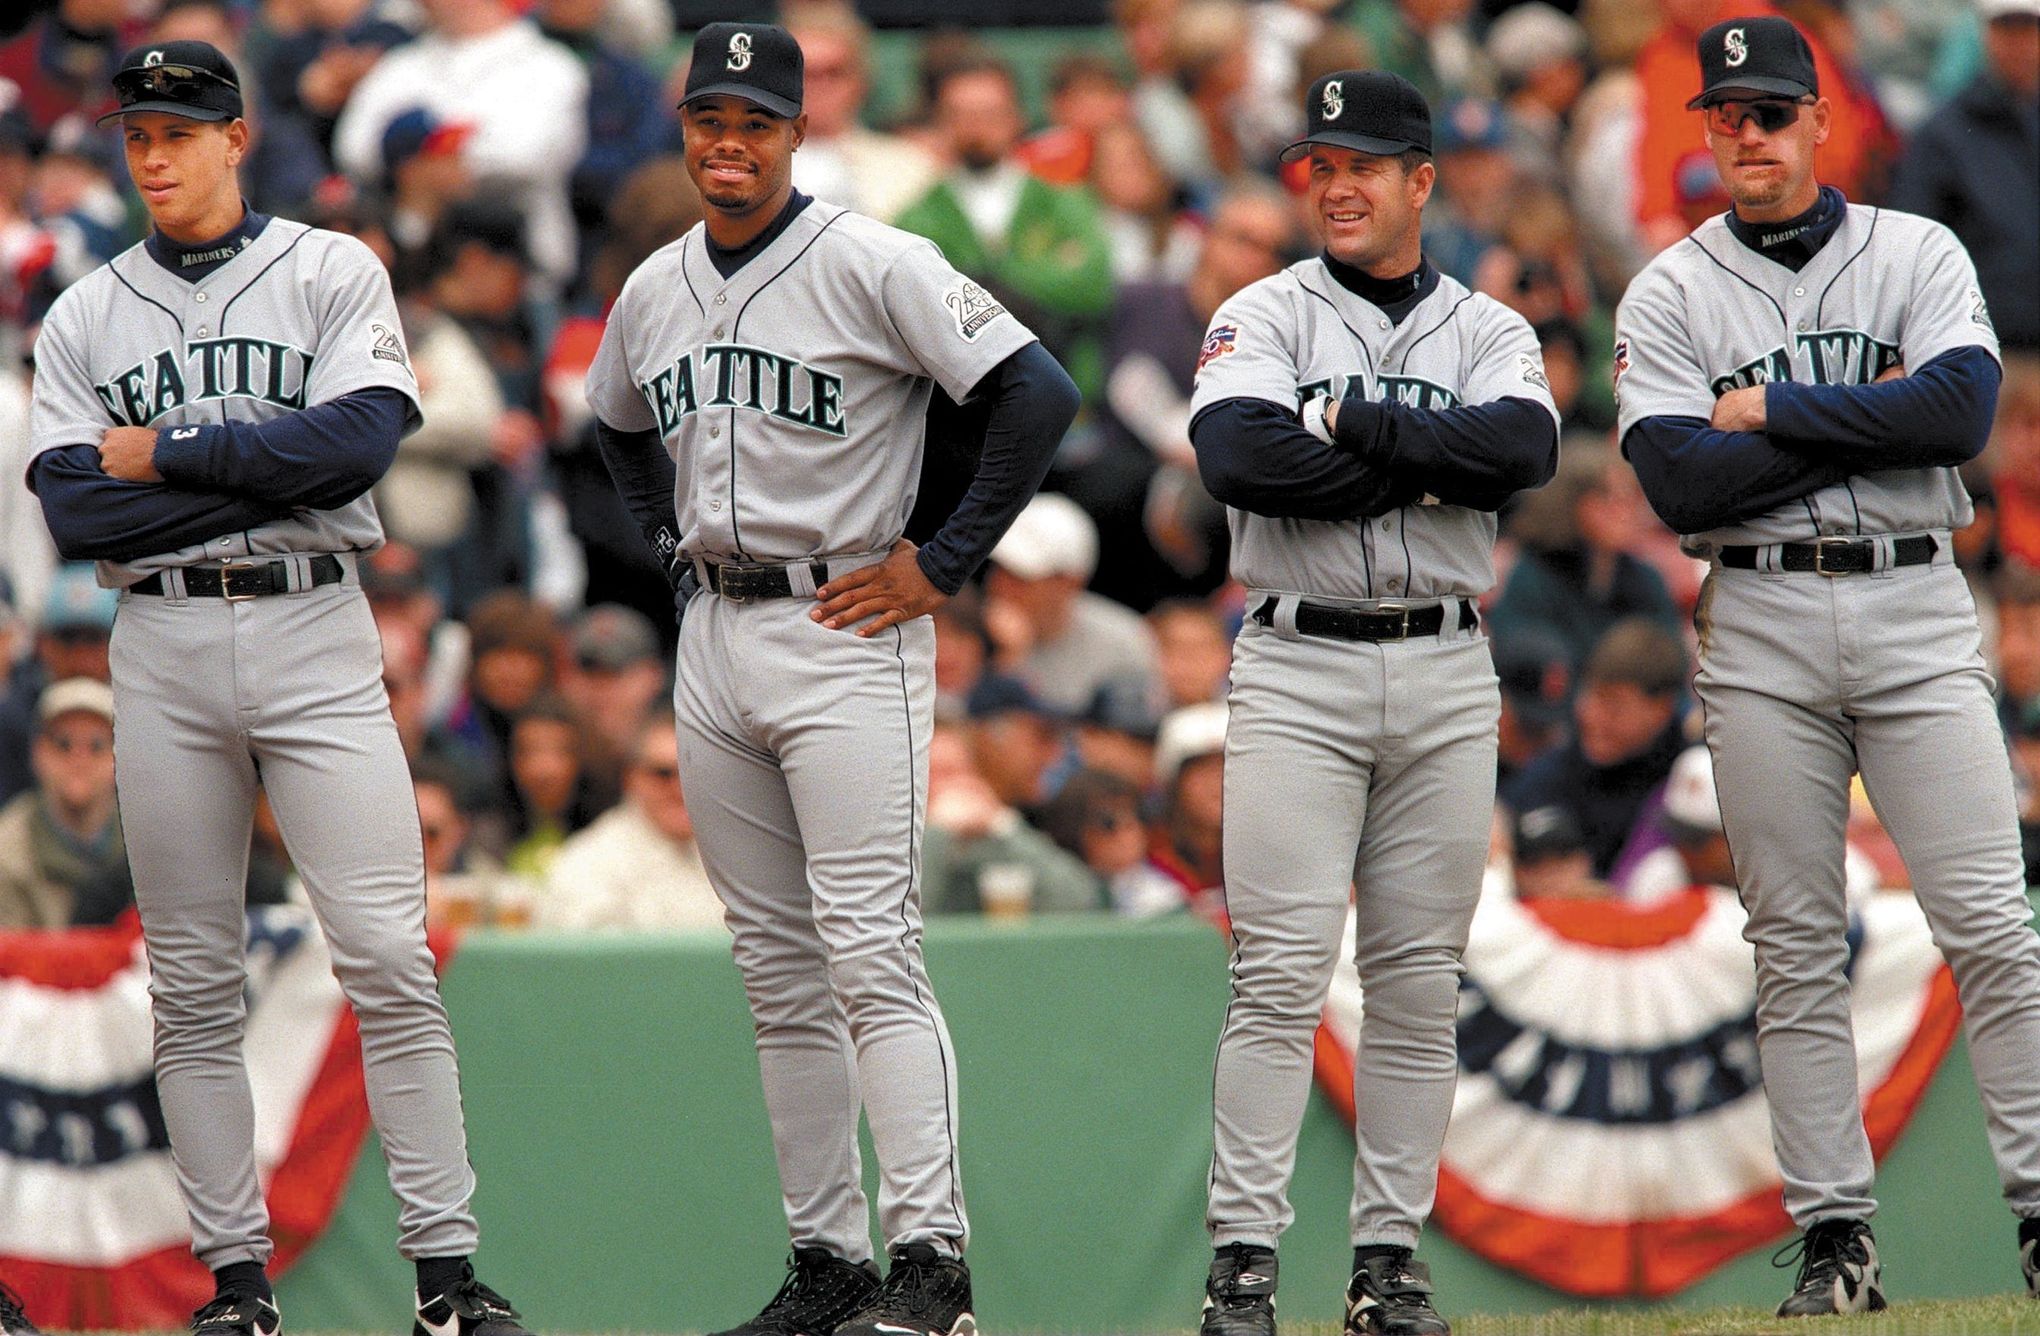 Why didn't star-studded Mariners from 1995-2001 reach World Series